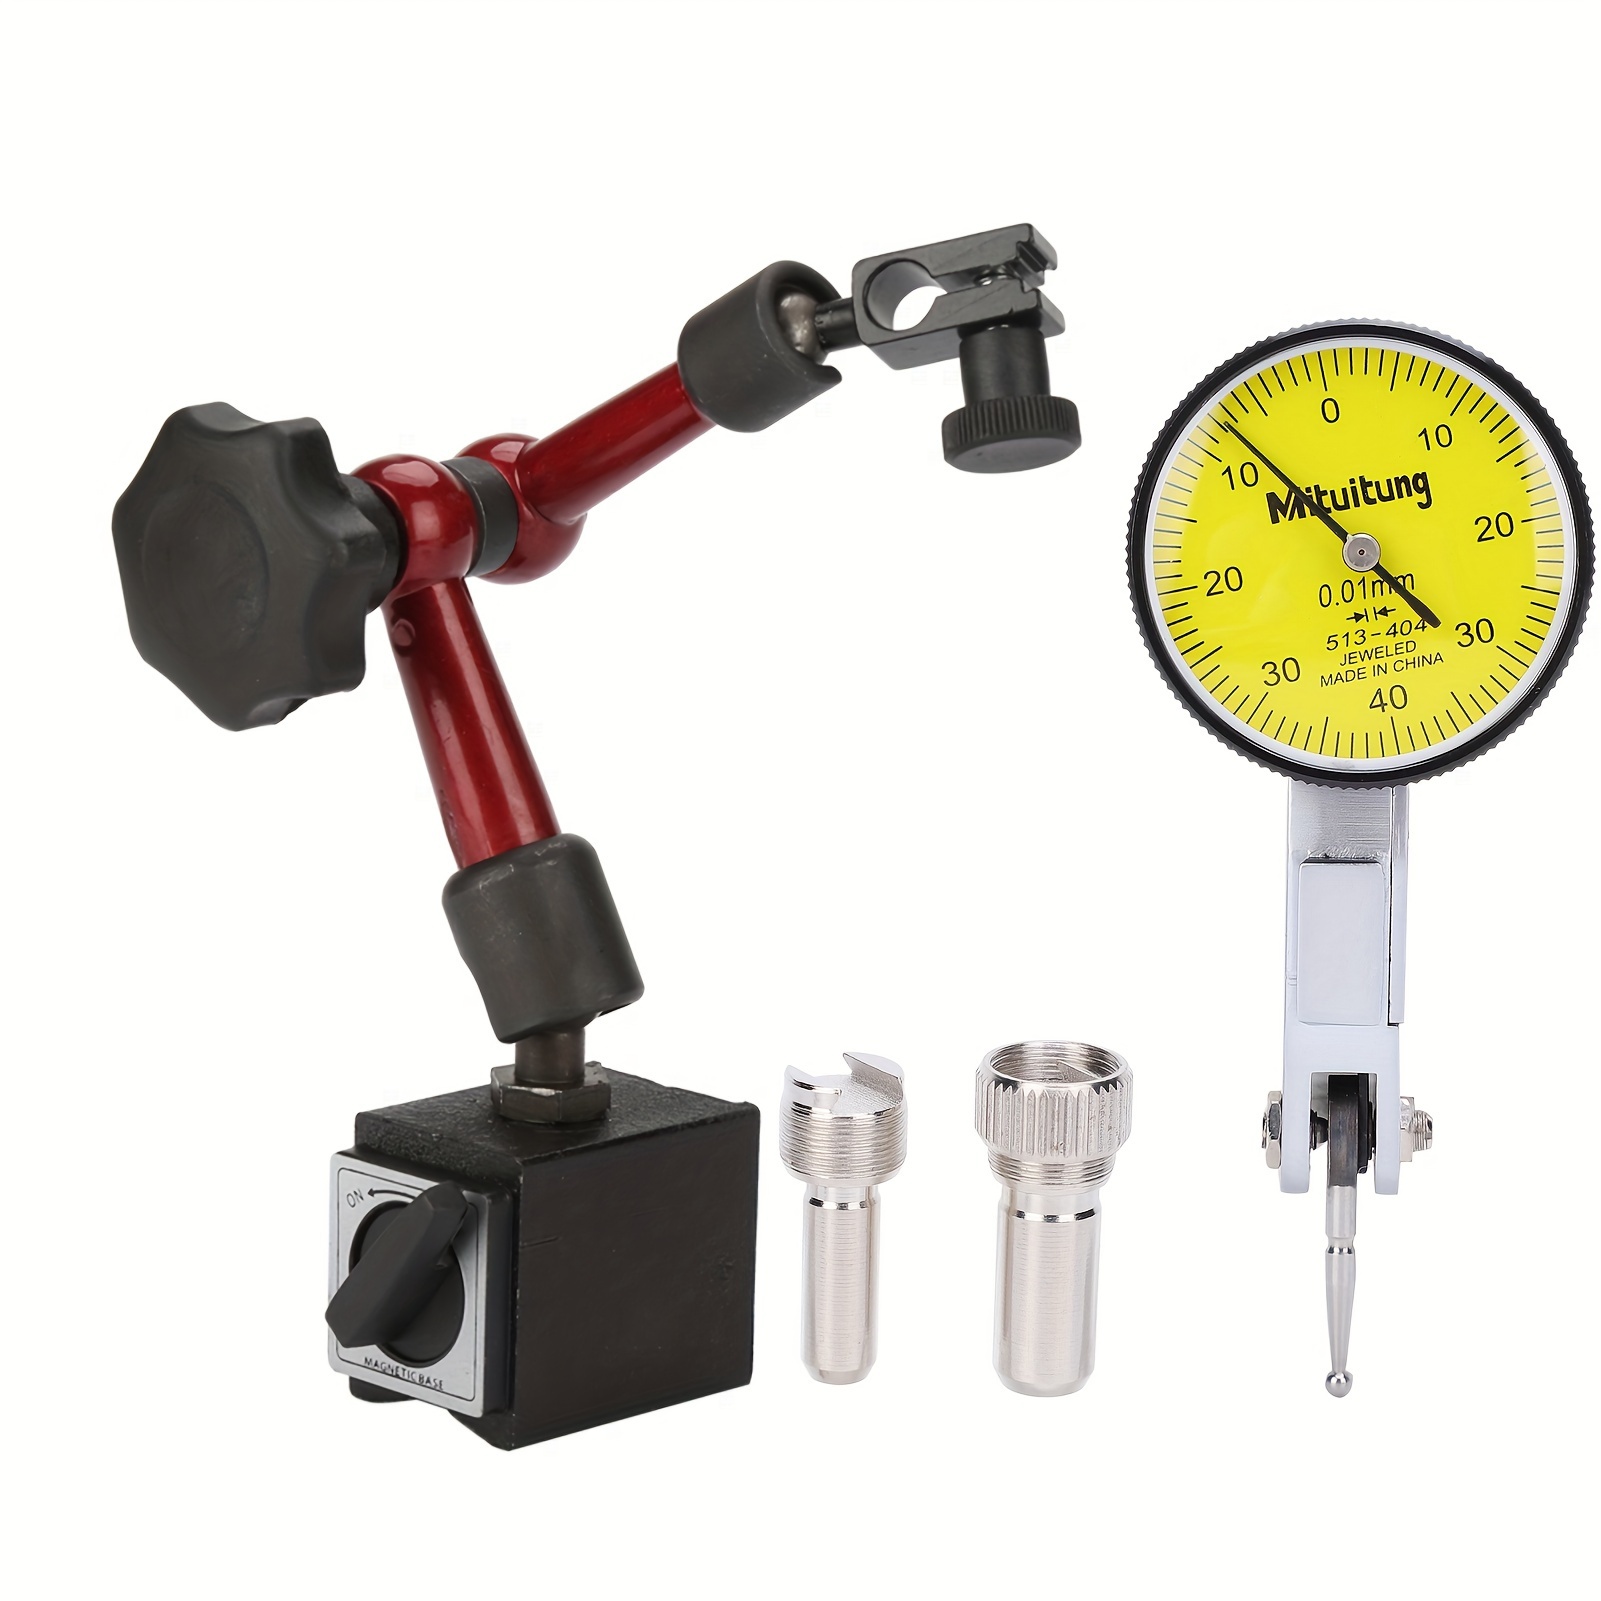 

Ywbl-wh Dial Indicator With Magnetic Base, Indicator Holder, Test Indicator, Flexible Magnetic Stand Base Holder With Lever Dial Test Indicator Gauge Scale And Installation Accessories